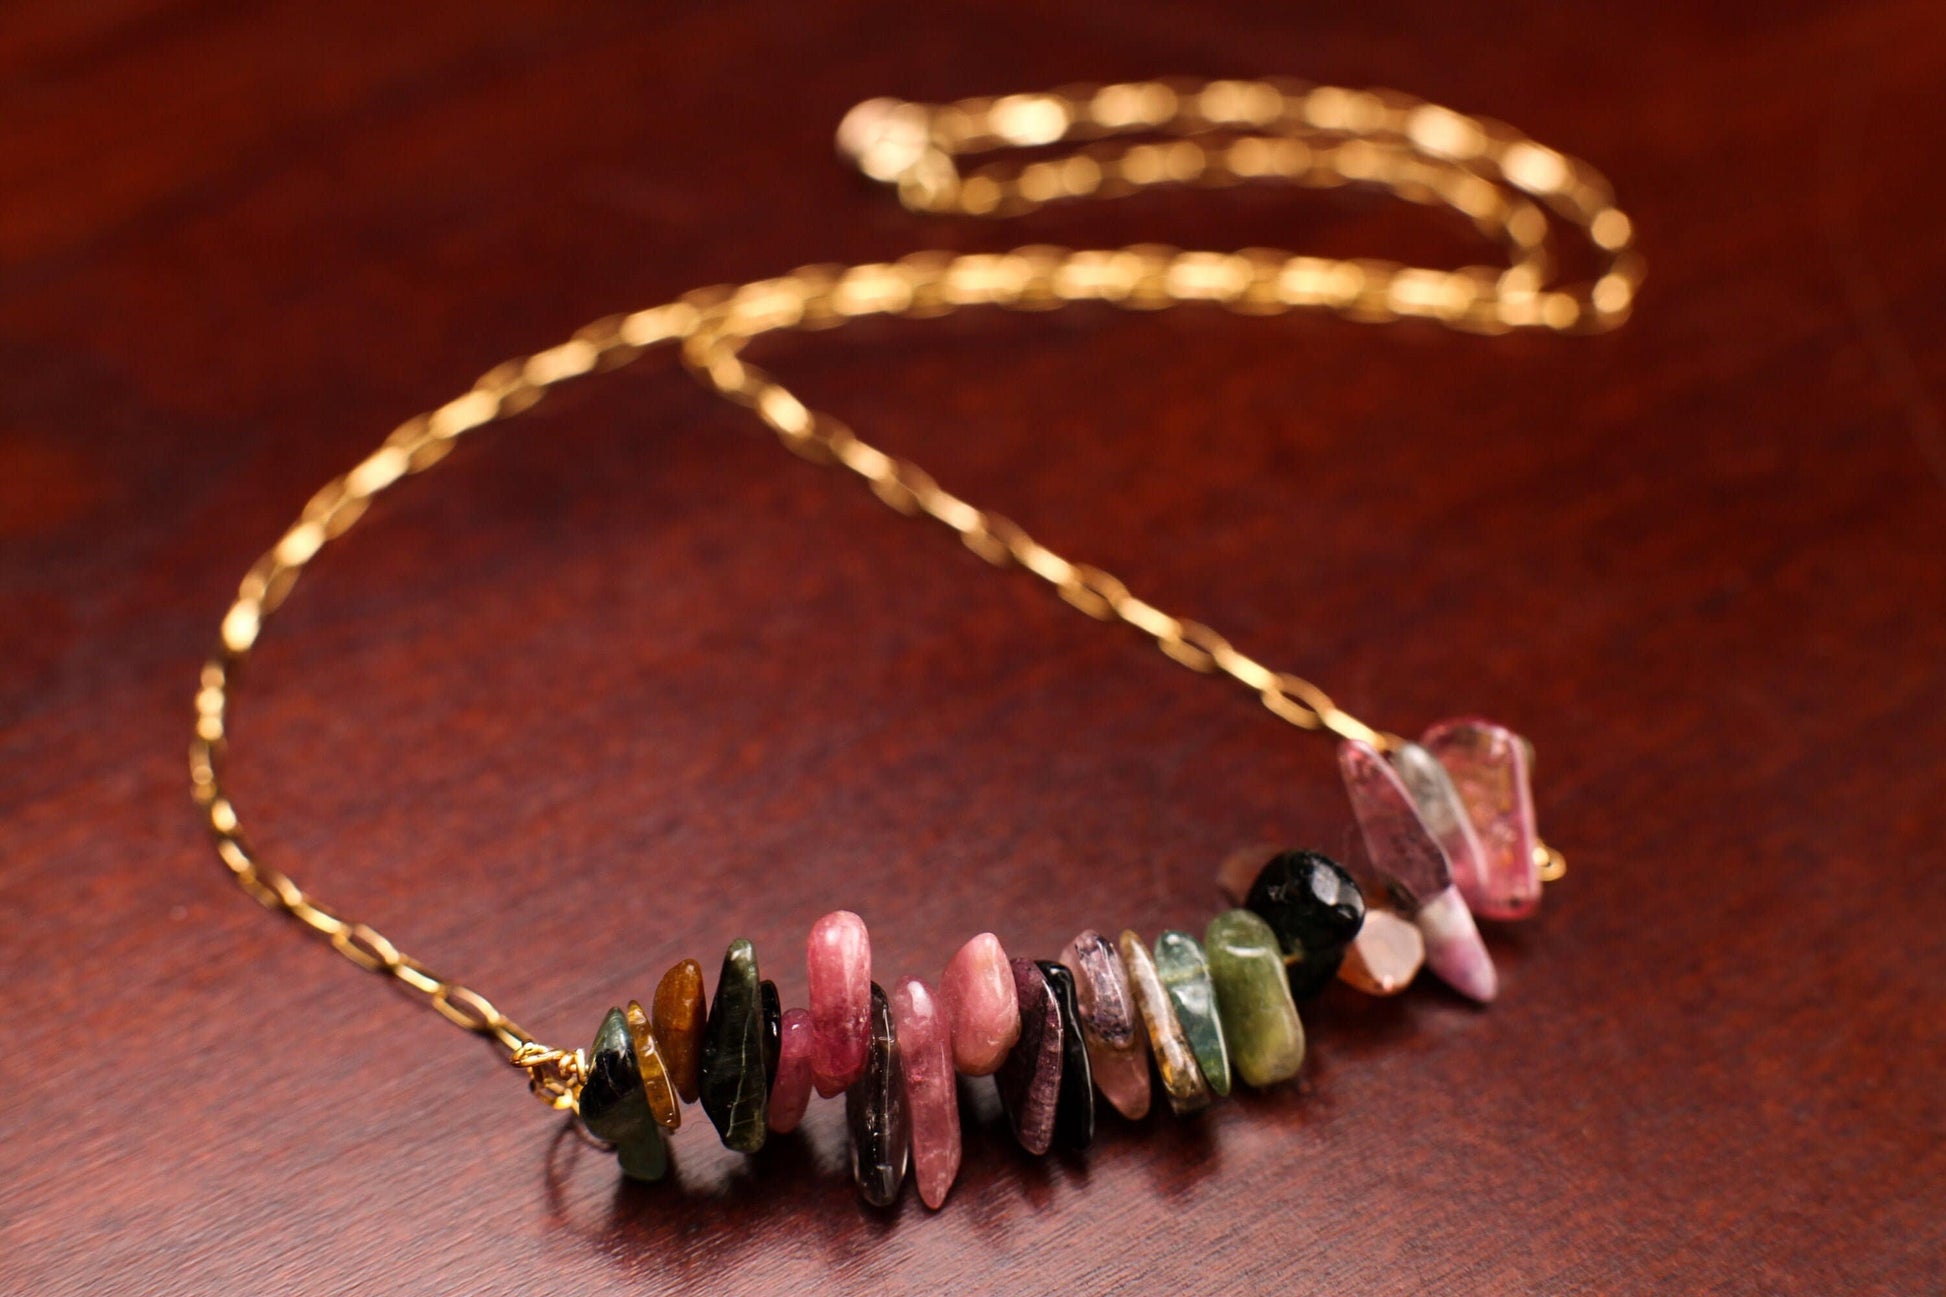 Watermelon Tourmaline 5-13mm Raw Freeform Chips, 14K Gold Filled, 925 Sterling Silver Bar Necklace,Healing Crystal,Chakra,October Birthstone